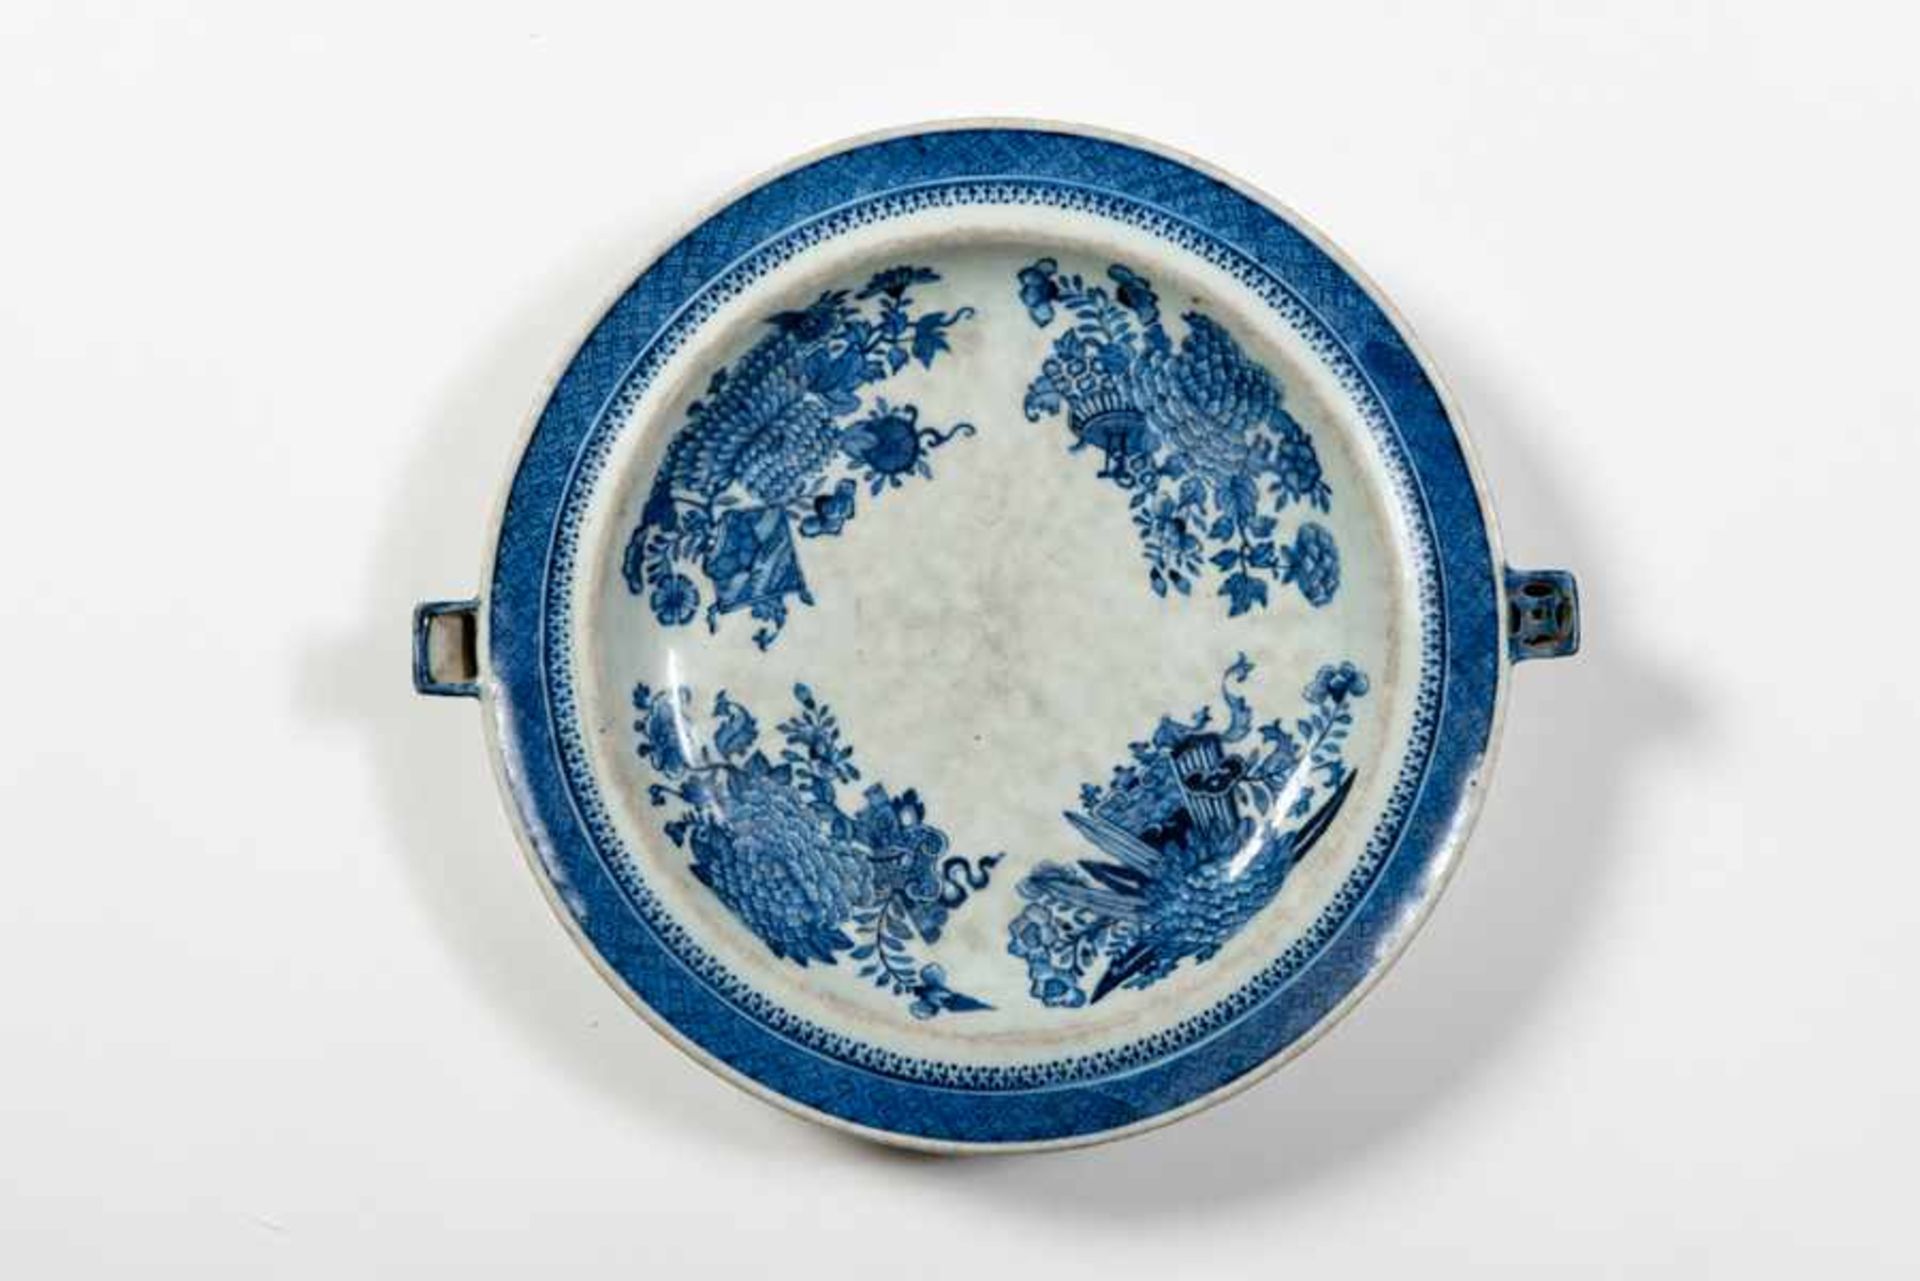 INSULATING BOWL Blue and whiteporcelain. China, Qing dynasty 19th cent. 保溫盆A very rare insulating - Image 2 of 3